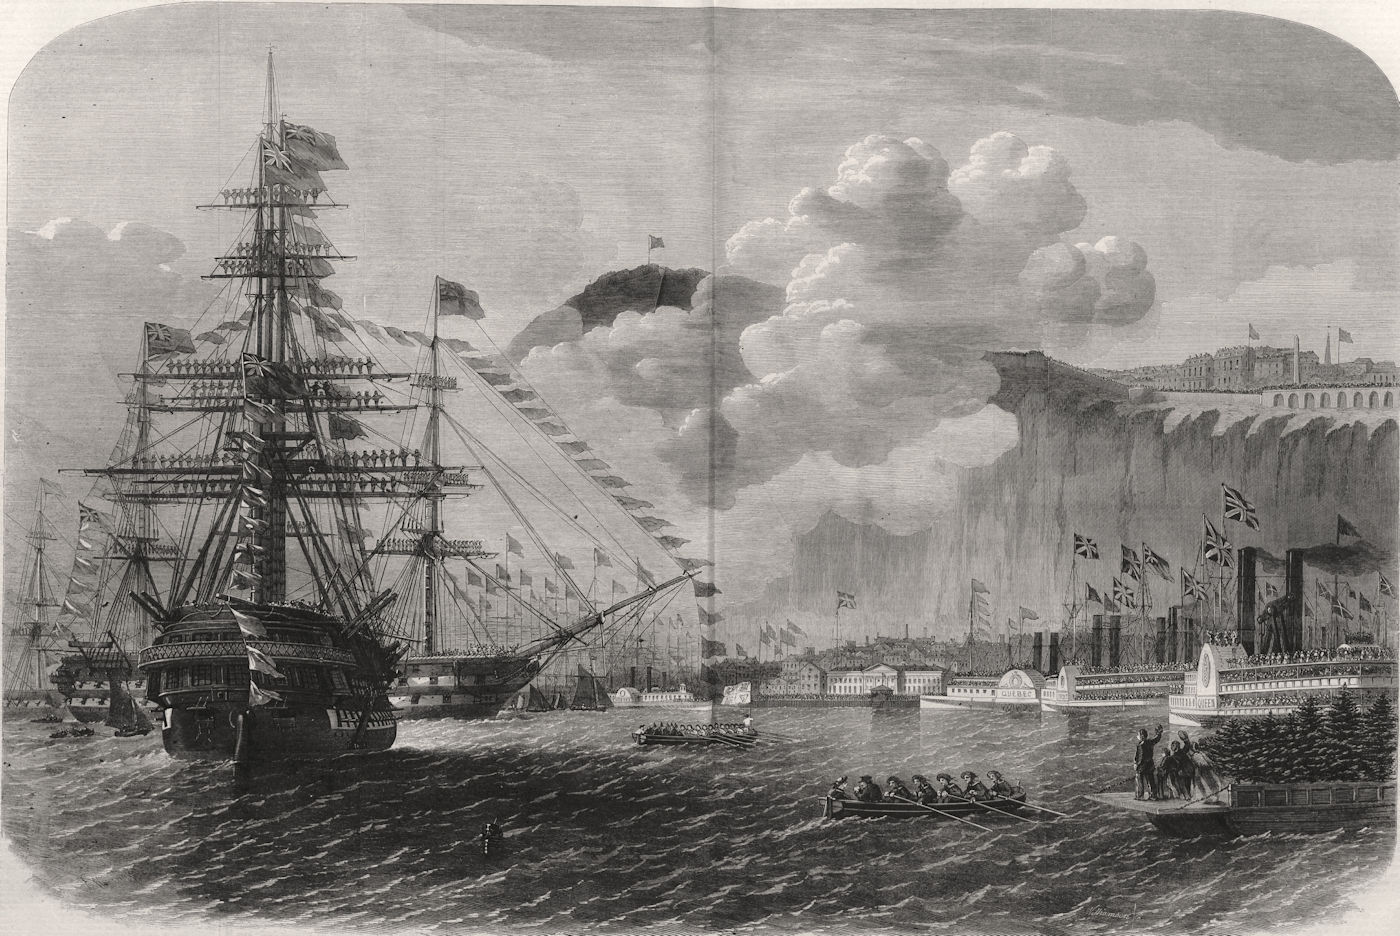 Associate Product The Prince of Wales (later King Edward VII) landing at Quebec. Canada 1860